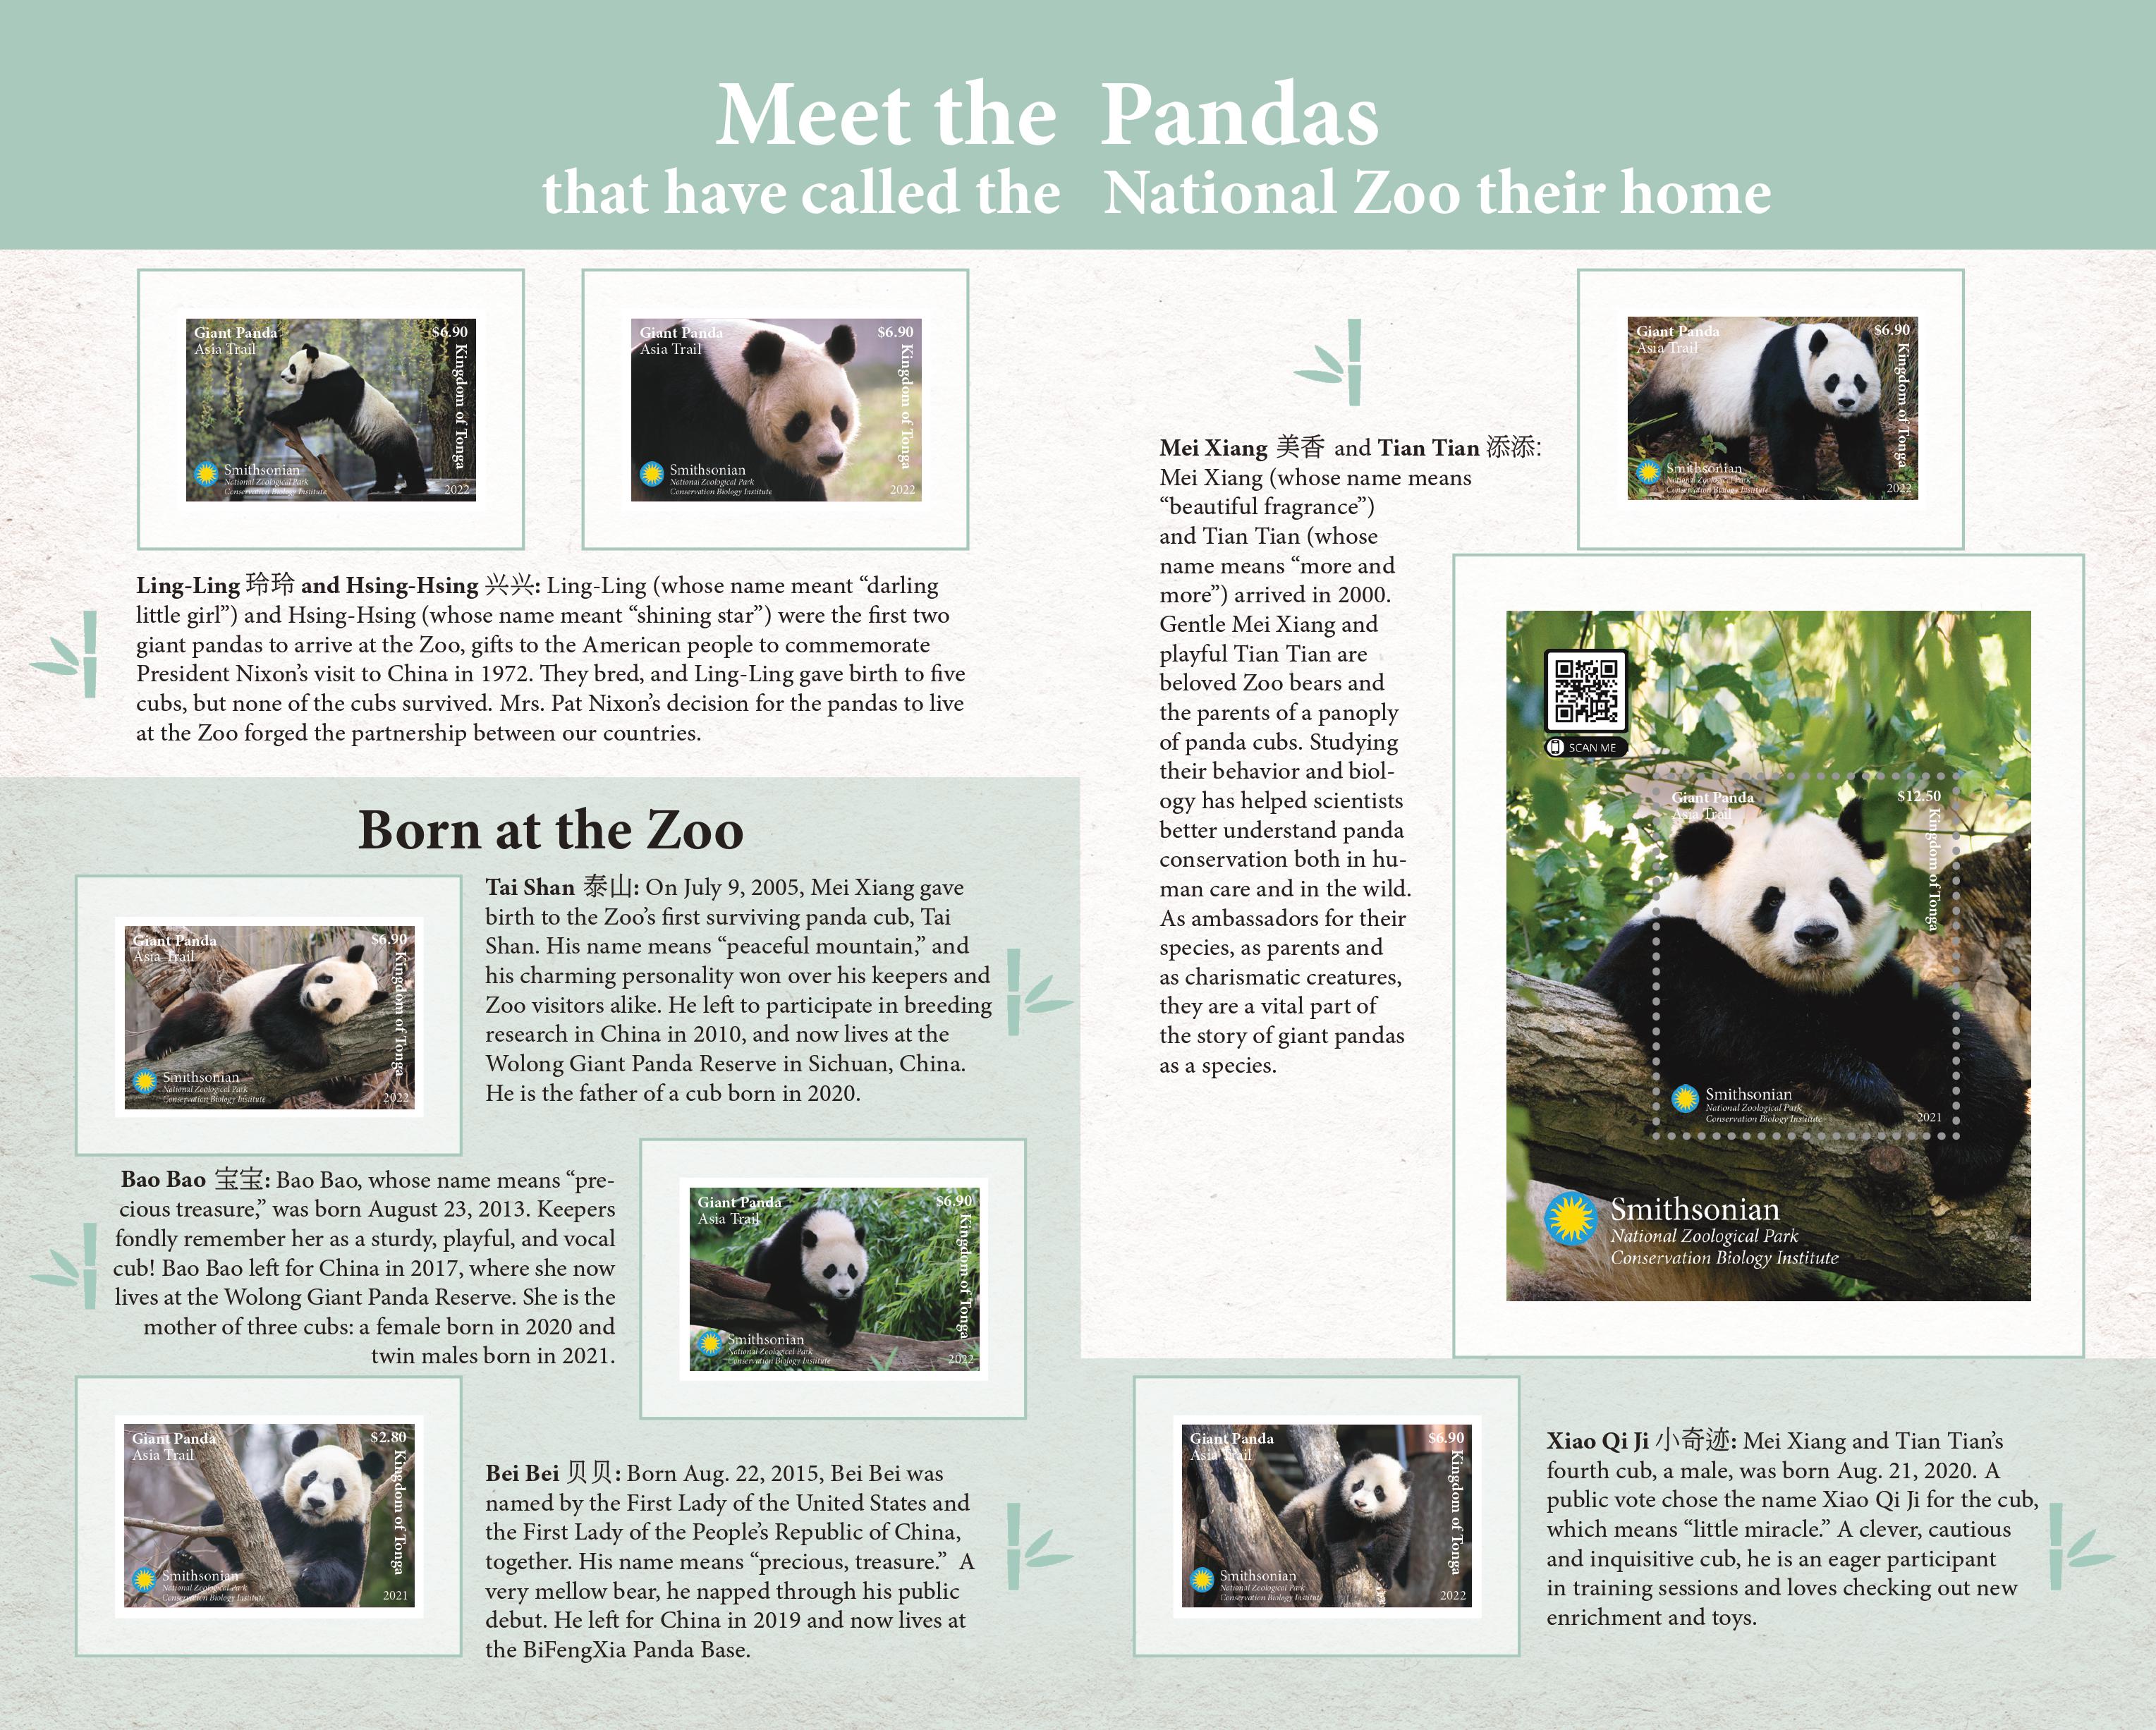 Special Edition: 50 Years of Giant Pandas at the National Zoo